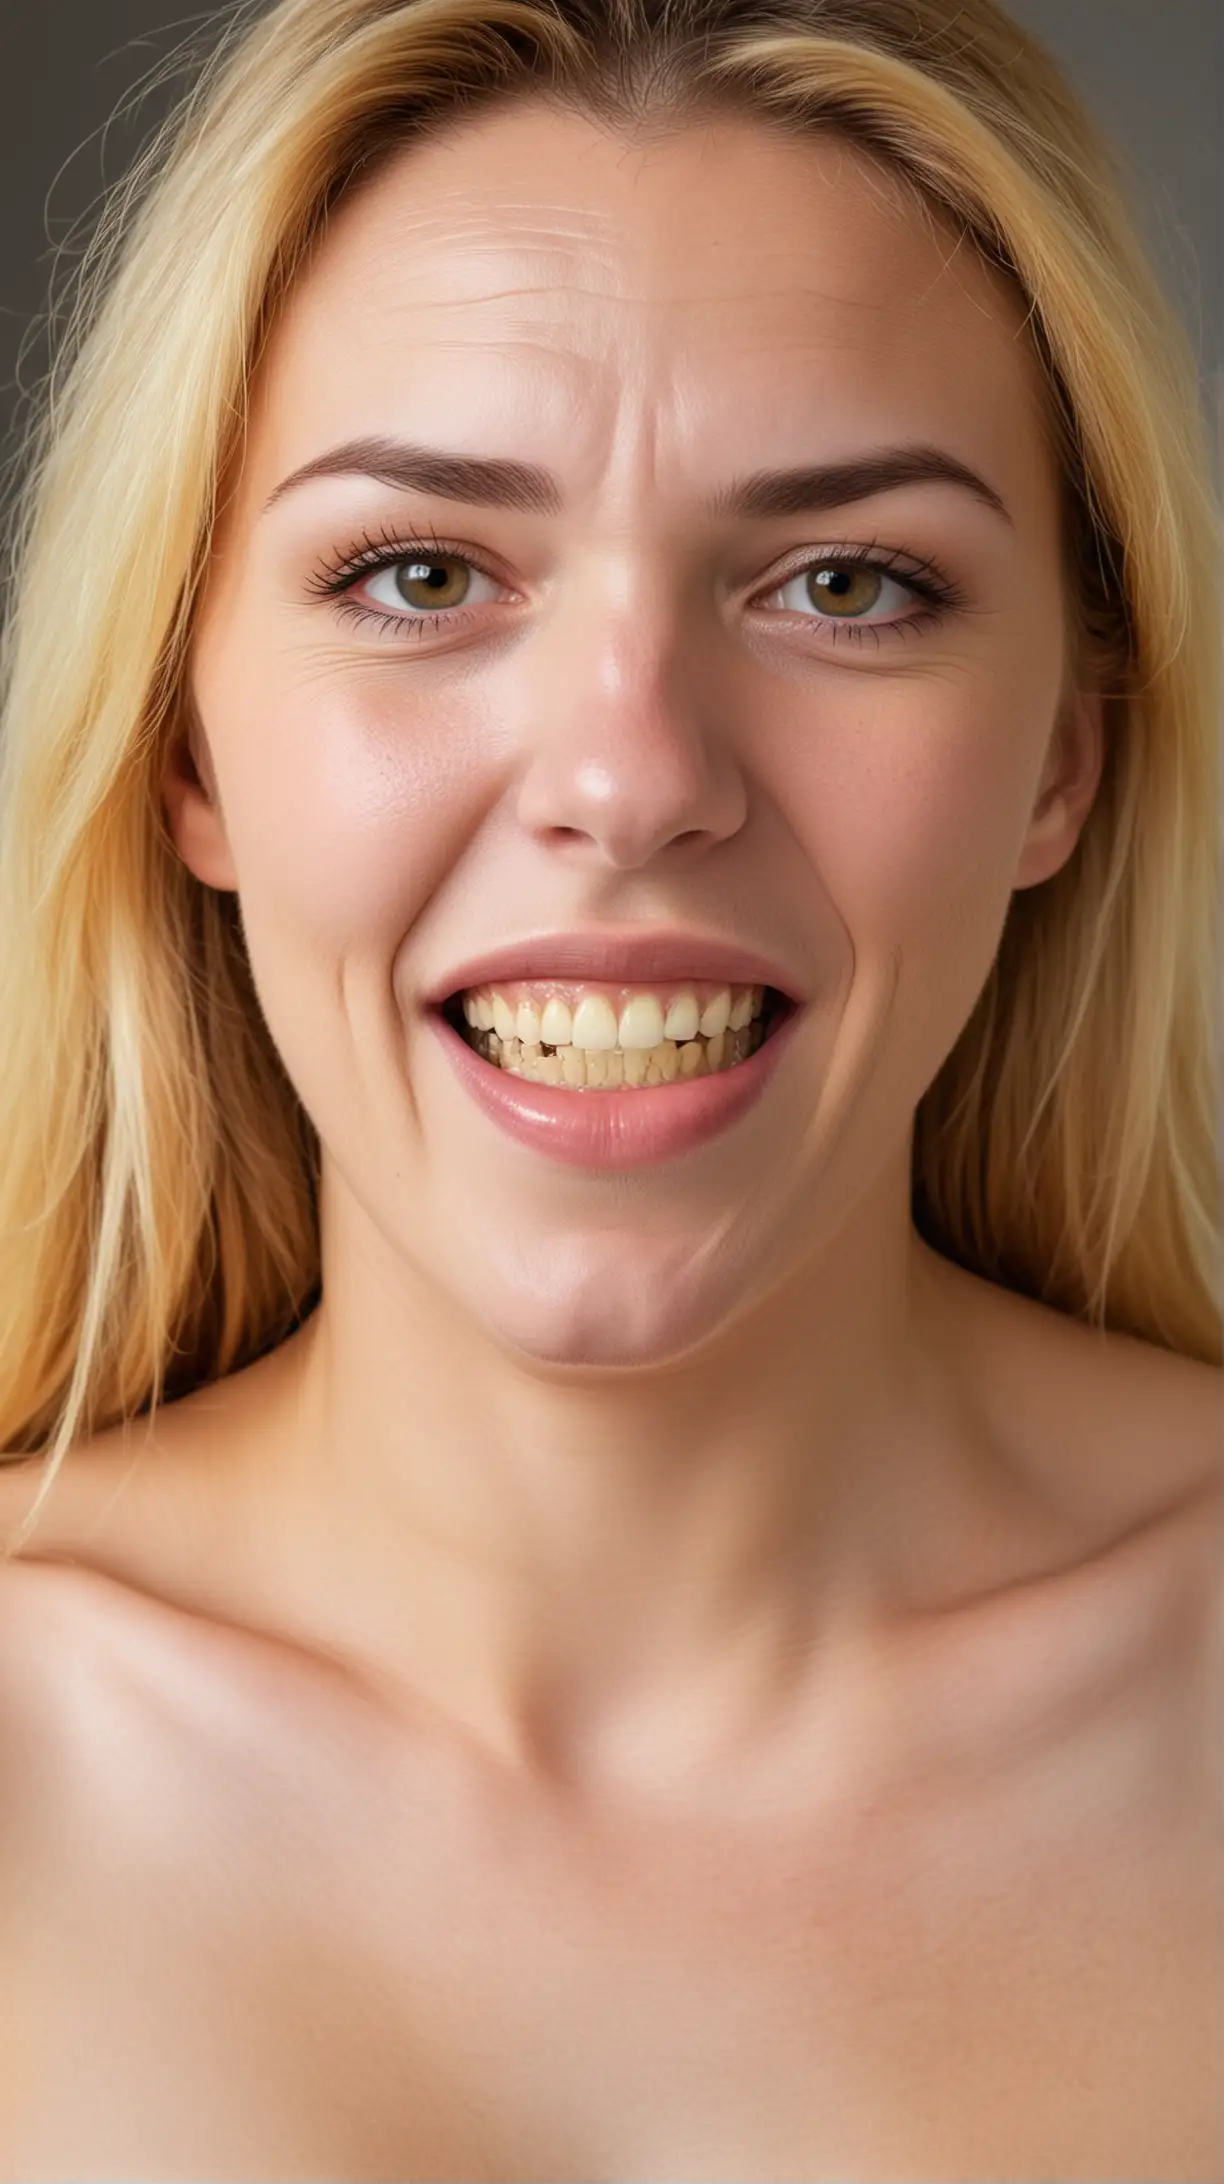 Unhealthy YellowTinted Nude Woman with Missing Teeth